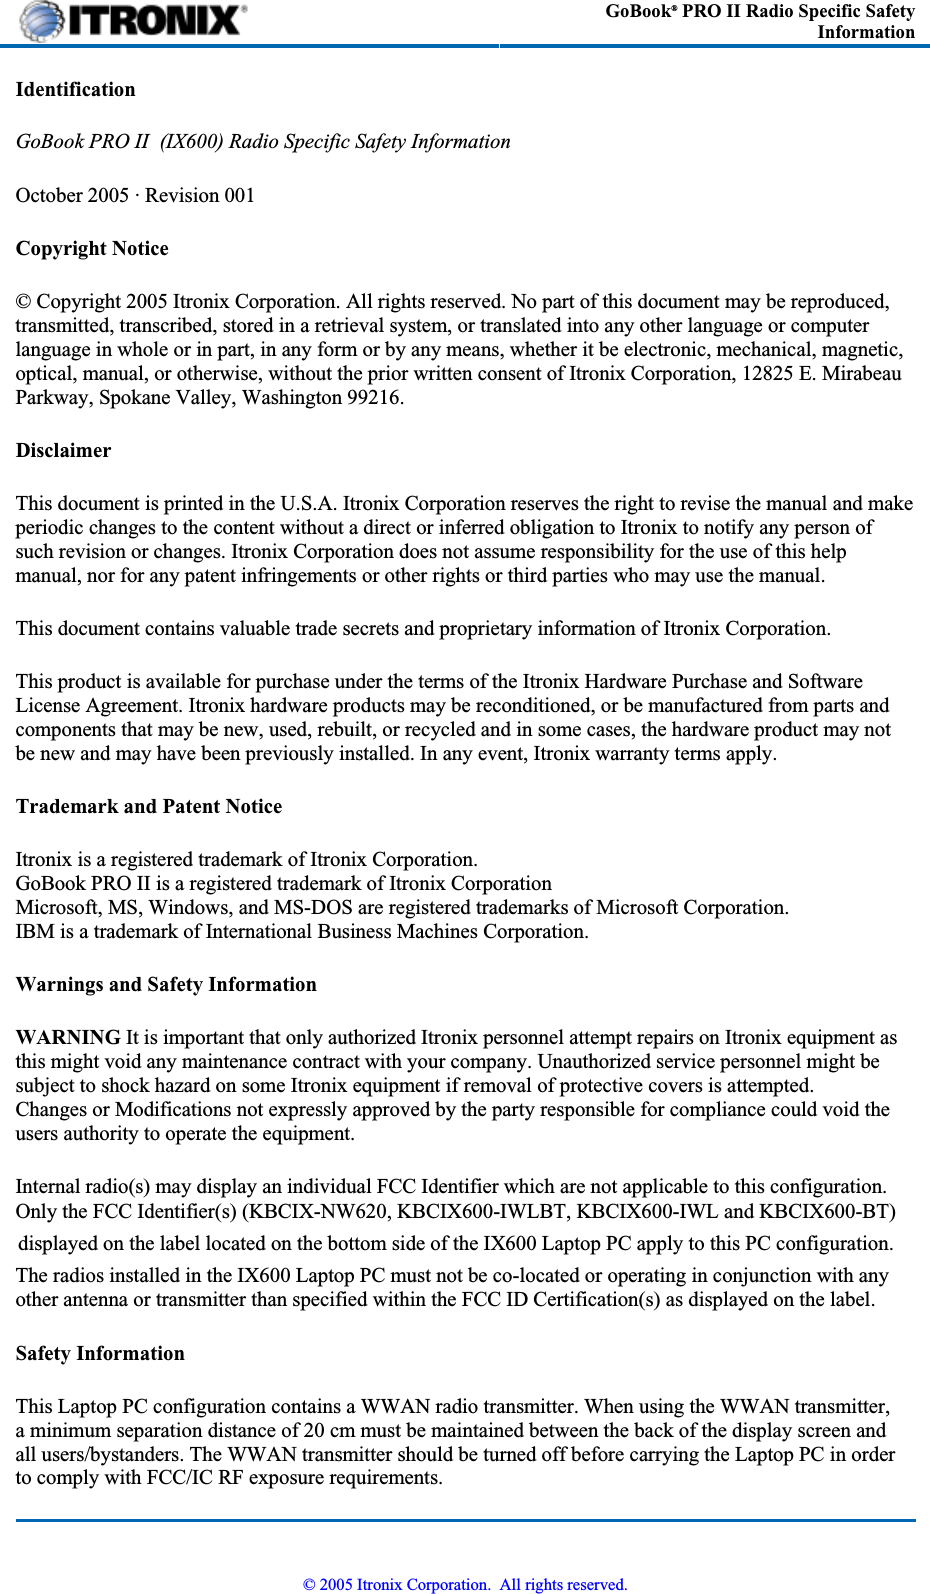 GoBook® PRO II Radio Specific Safety Information IdentificationGoBook PRO II  (IX600) Radio Specific Safety Information October 2005 · Revision 001 Copyright Notice© Copyright 2005 Itronix Corporation. All rights reserved. No part of this document may be reproduced, transmitted, transcribed, stored in a retrieval system, or translated into any other language or computer language in whole or in part, in any form or by any means, whether it be electronic, mechanical, magnetic,optical, manual, or otherwise, without the prior written consent of Itronix Corporation, 12825 E. MirabeauParkway, Spokane Valley, Washington 99216.DisclaimerThis document is printed in the U.S.A. Itronix Corporation reserves the right to revise the manual and make periodic changes to the content without a direct or inferred obligation to Itronix to notify any person of such revision or changes. Itronix Corporation does not assume responsibility for the use of this help manual, nor for any patent infringements or other rights or third parties who may use the manual. This document contains valuable trade secrets and proprietary information of Itronix Corporation. This product is available for purchase under the terms of the Itronix Hardware Purchase and Software License Agreement. Itronix hardware products may be reconditioned, or be manufactured from parts and components that may be new, used, rebuilt, or recycled and in some cases, the hardware product may not be new and may have been previously installed. In any event, Itronix warranty terms apply. Trademark and Patent NoticeItronix is a registered trademark of Itronix Corporation. GoBook PRO II is a registered trademark of Itronix Corporation Microsoft, MS, Windows, and MS-DOS are registered trademarks of Microsoft Corporation. IBM is a trademark of International Business Machines Corporation. Warnings and Safety InformationWARNING It is important that only authorized Itronix personnel attempt repairs on Itronix equipment as this might void any maintenance contract with your company. Unauthorized service personnel might be subject to shock hazard on some Itronix equipment if removal of protective covers is attempted.       Changes or Modifications not expressly approved by the party responsible for compliance could void the users authority to operate the equipment. Internal radio(s) may display an individual FCC Identifier which are not applicable to this configuration.Only the FCC Identifier(s) (KBCIX-NW620, KBCIX600-IWLBT, KBCIX600-IWL and KBCIX600-BT) displayed on the label located on the bottom side of the IX600 Laptop PC apply to this PC configuration.The radios installed in the IX600 Laptop PC must not be co-located or operating in conjunction with anyother antenna or transmitter than specified within the FCC ID Certification(s) as displayed on the label.Safety InformationThis Laptop PC configuration contains a WWAN radio transmitter. When using the WWAN transmitter,a minimum separation distance of 20 cm must be maintained between the back of the display screen andall users/bystanders. The WWAN transmitter should be turned off before carrying the Laptop PC in orderto comply with FCC/IC RF exposure requirements.© 2005 Itronix Corporation.  All rights reserved.